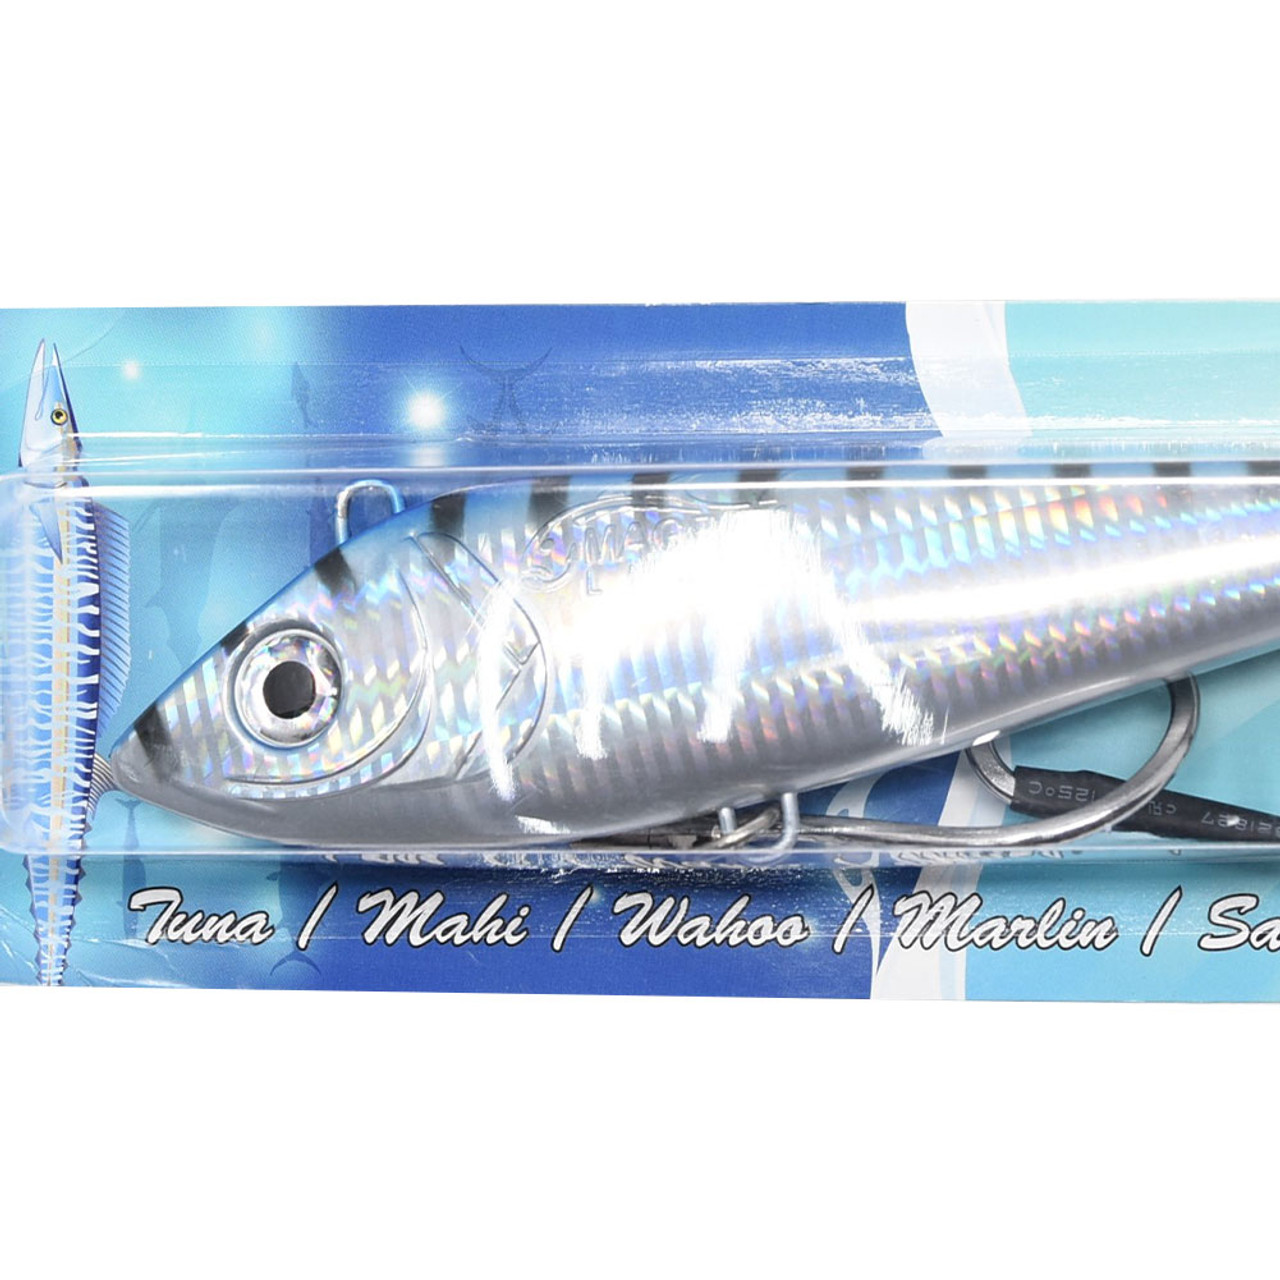 Gigante Marlin Lure and Teaser - MagBay Lures - Wahoo and Marlin Fishing  Lures